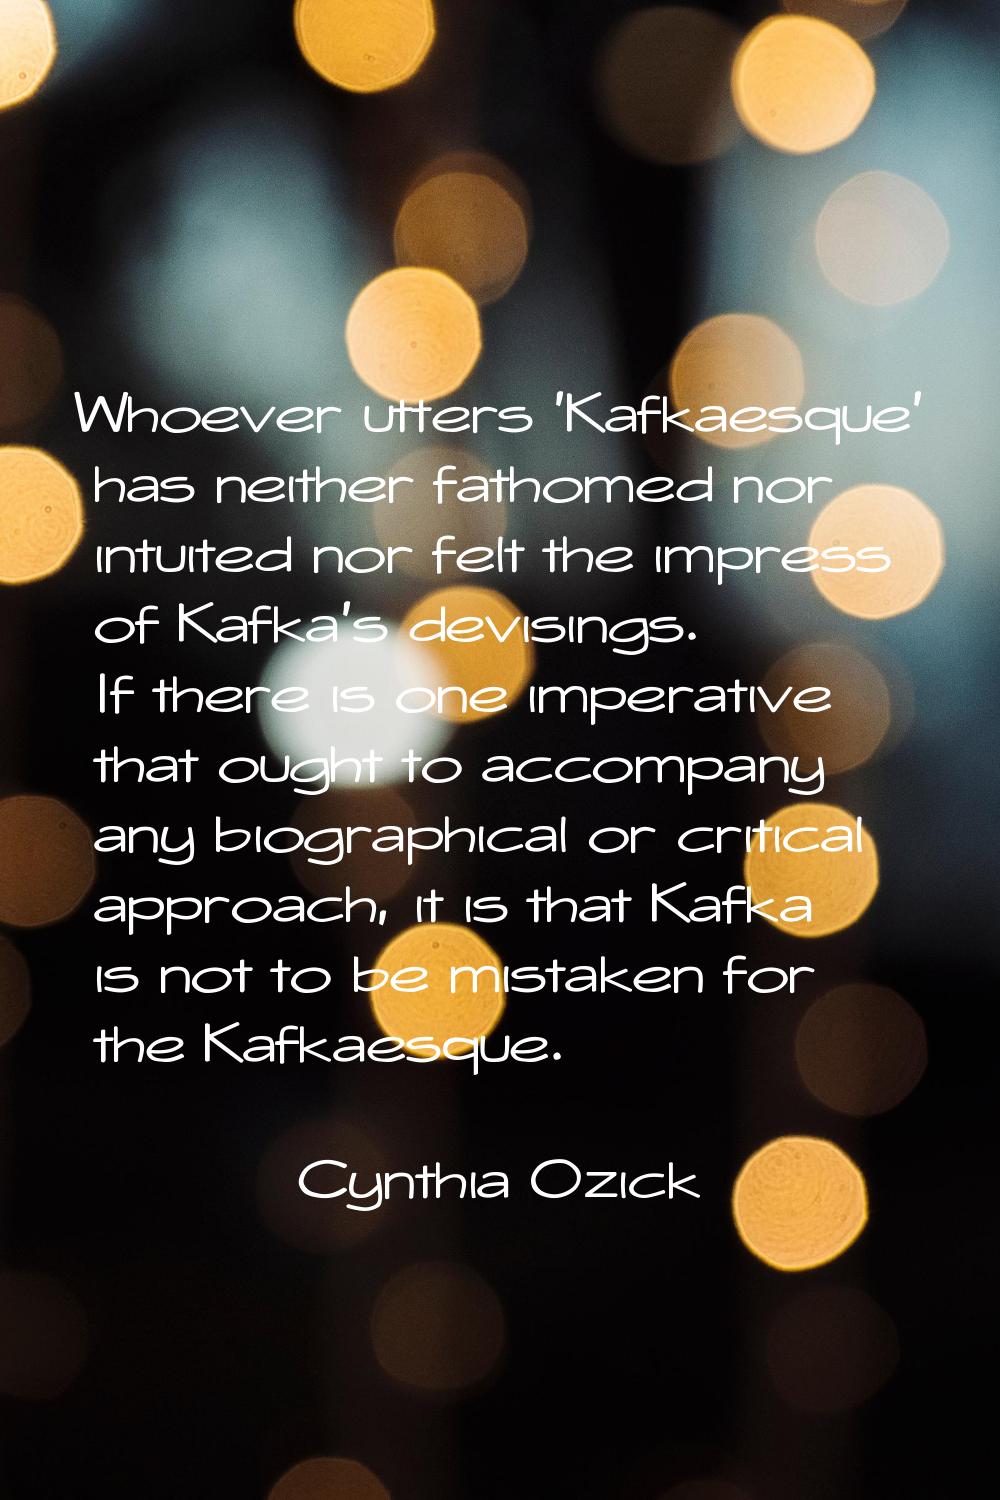 Whoever utters 'Kafkaesque' has neither fathomed nor intuited nor felt the impress of Kafka's devis